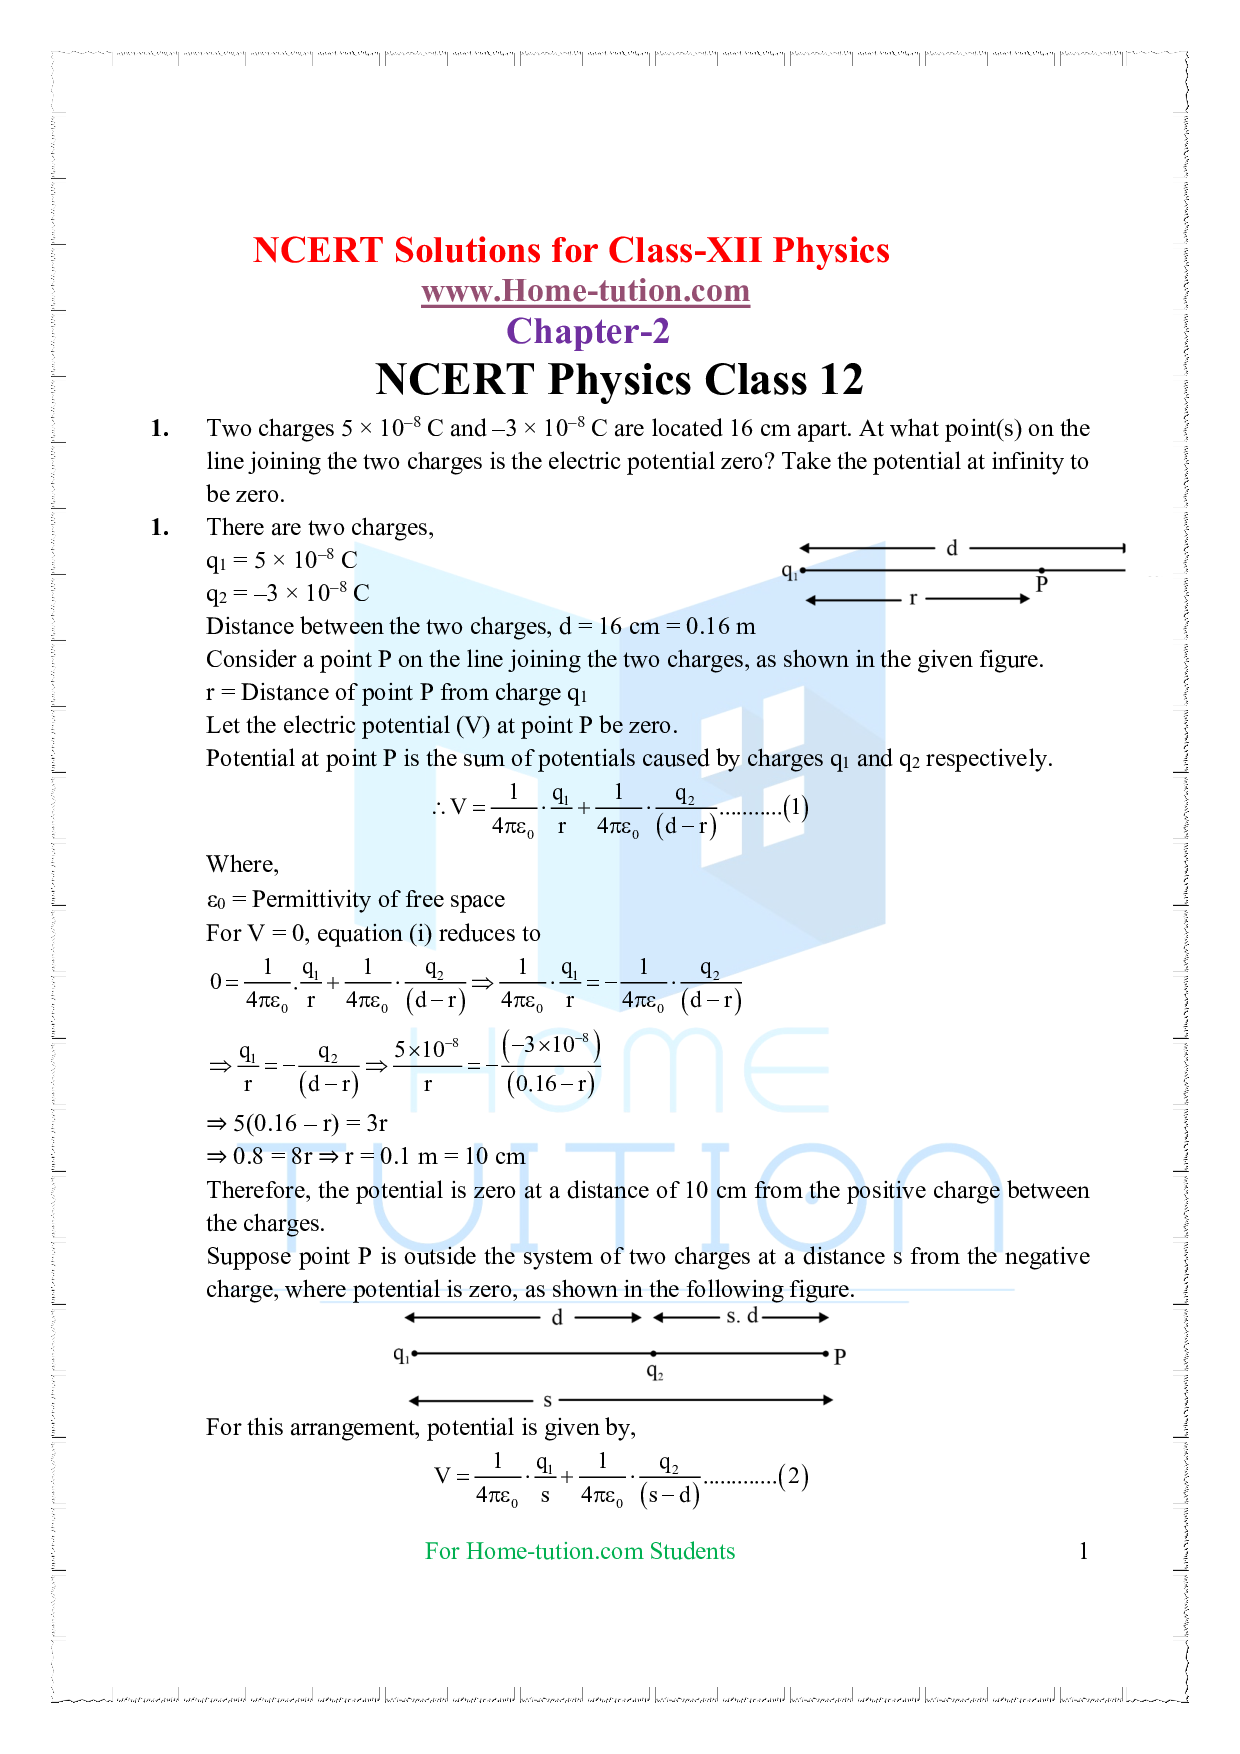 Chapter 2 Electrostatic Potential and Capacitance